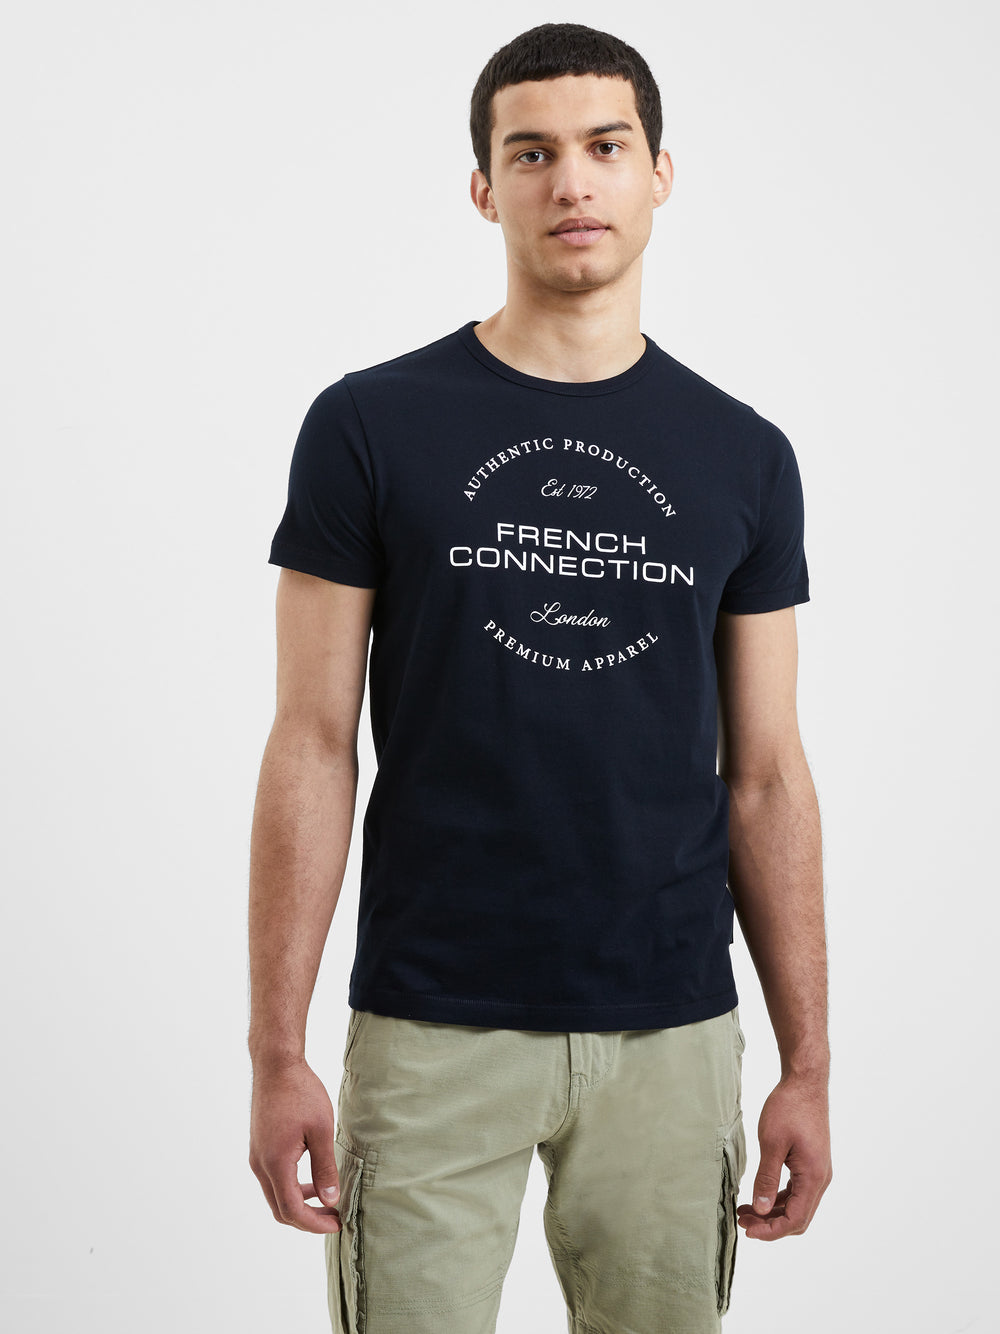 French Connection Graphic T-Shirt Dark Navy/White | French Connection UK